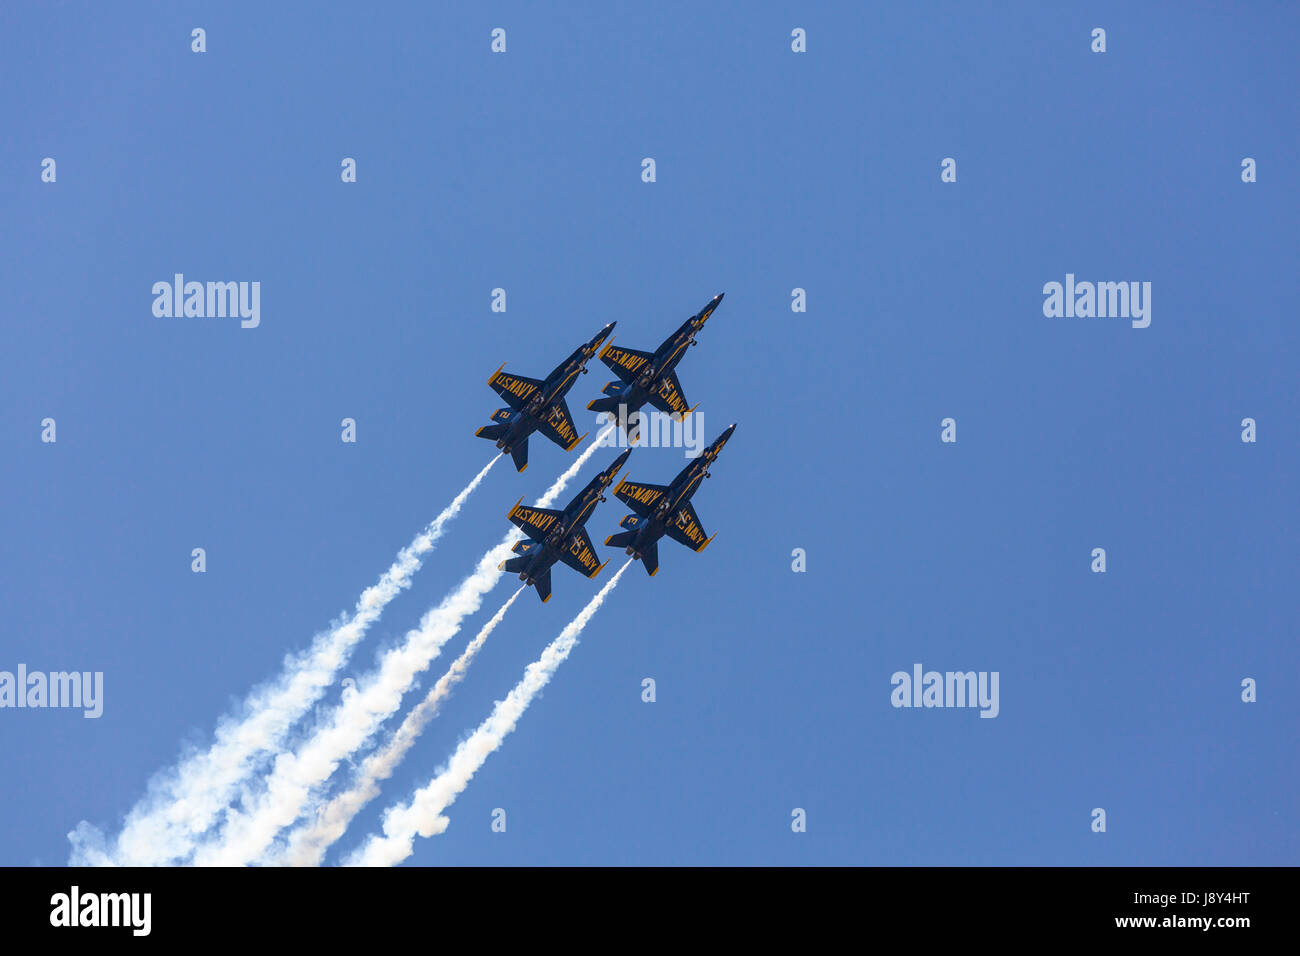 The US Navy Blue Angels, air acrobatic team at the Air National Guard Airshow in Sioux Falls, South Dakota, USA. Stock Photo